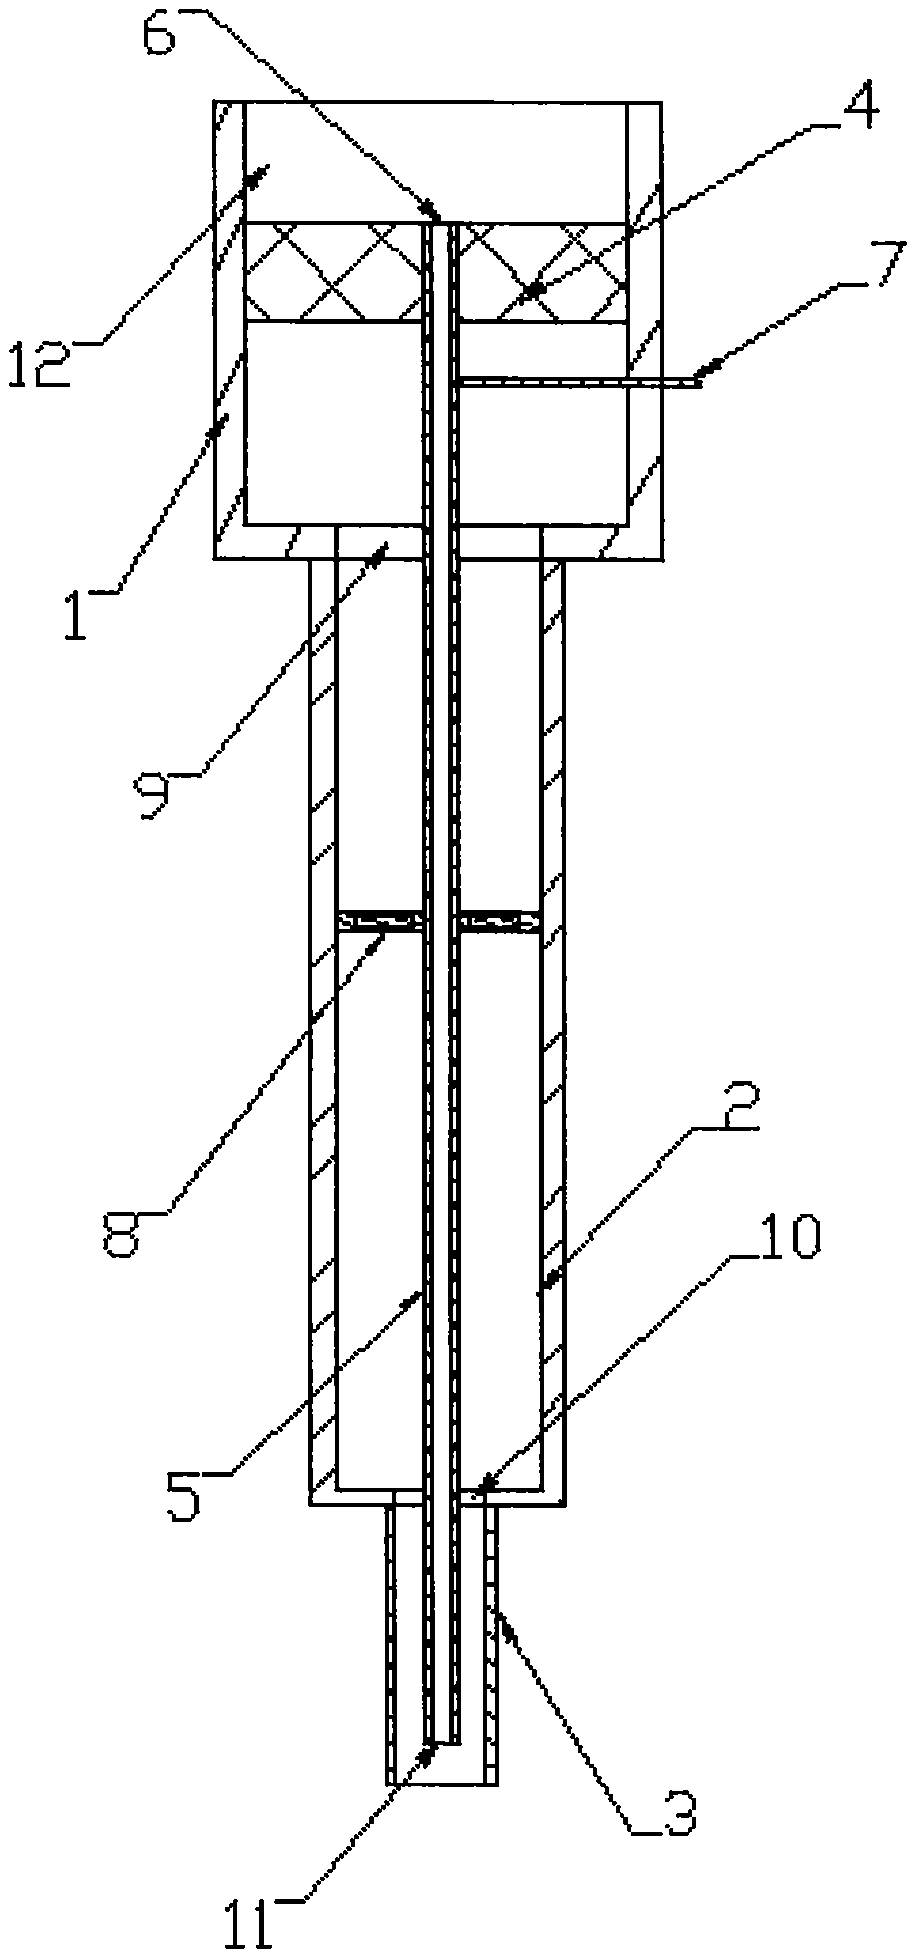 Probing small-sized electrostatic spinning instrument